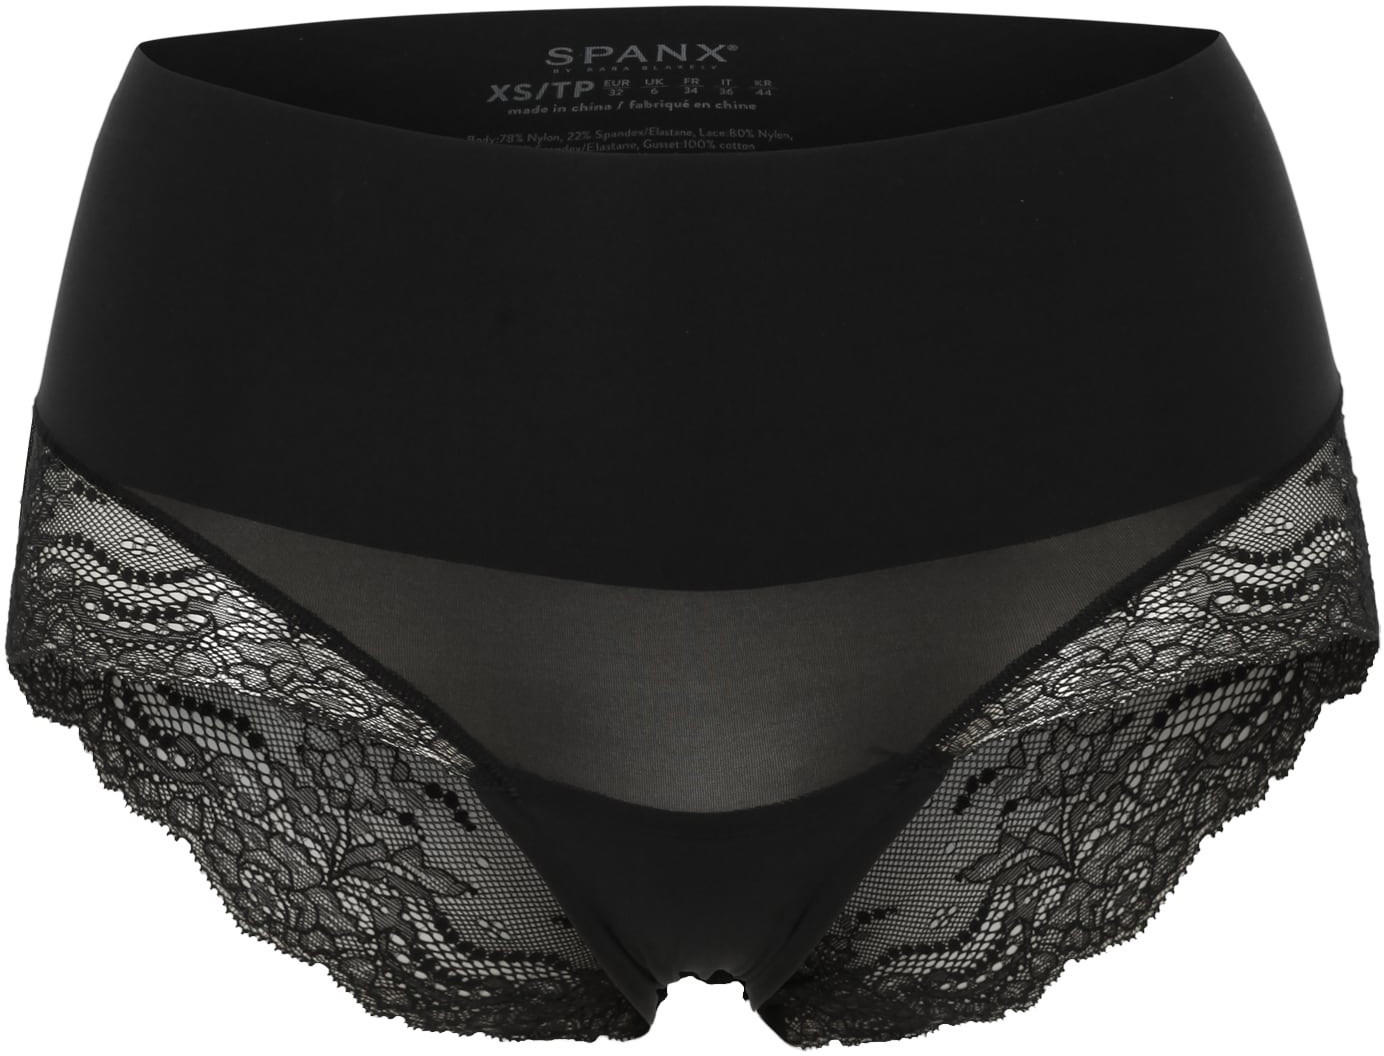 Spanx Undie-tectable Lace Hi-Hipster Panty